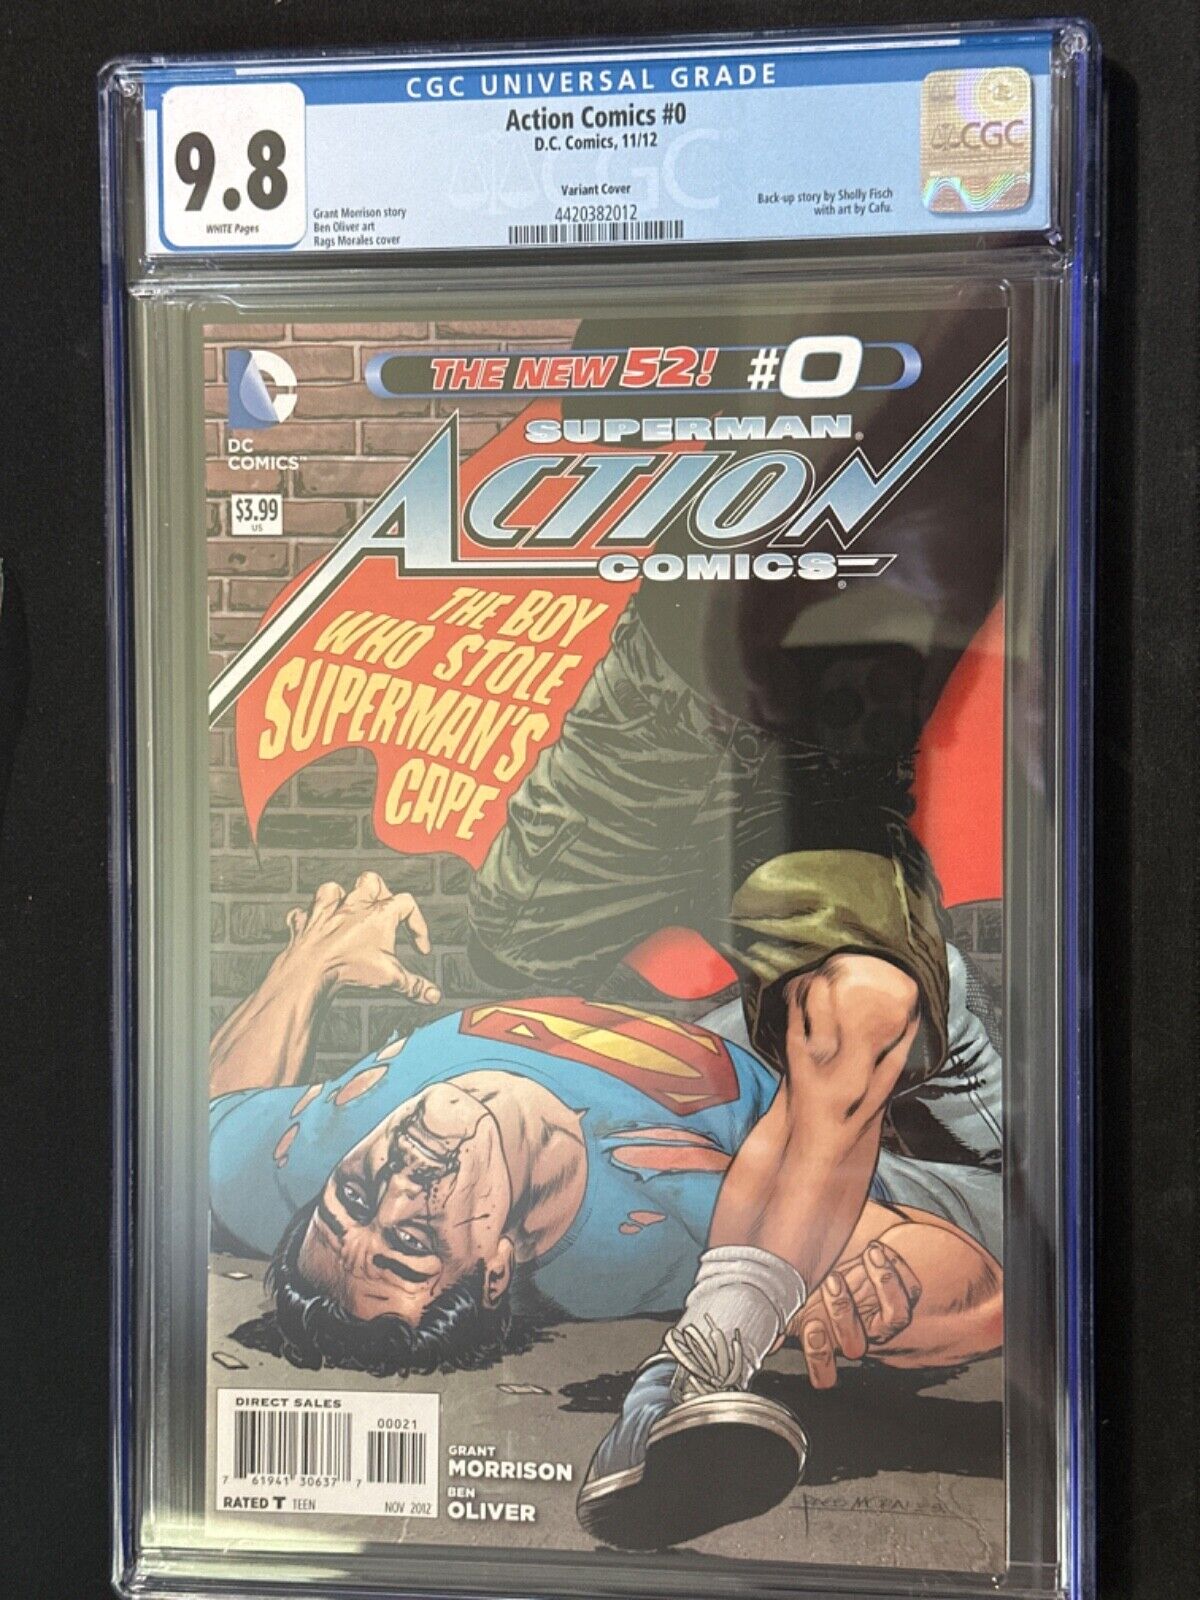 Action Comics #0 Variant Cover CGC 9.8 WHITE PAGES 2012